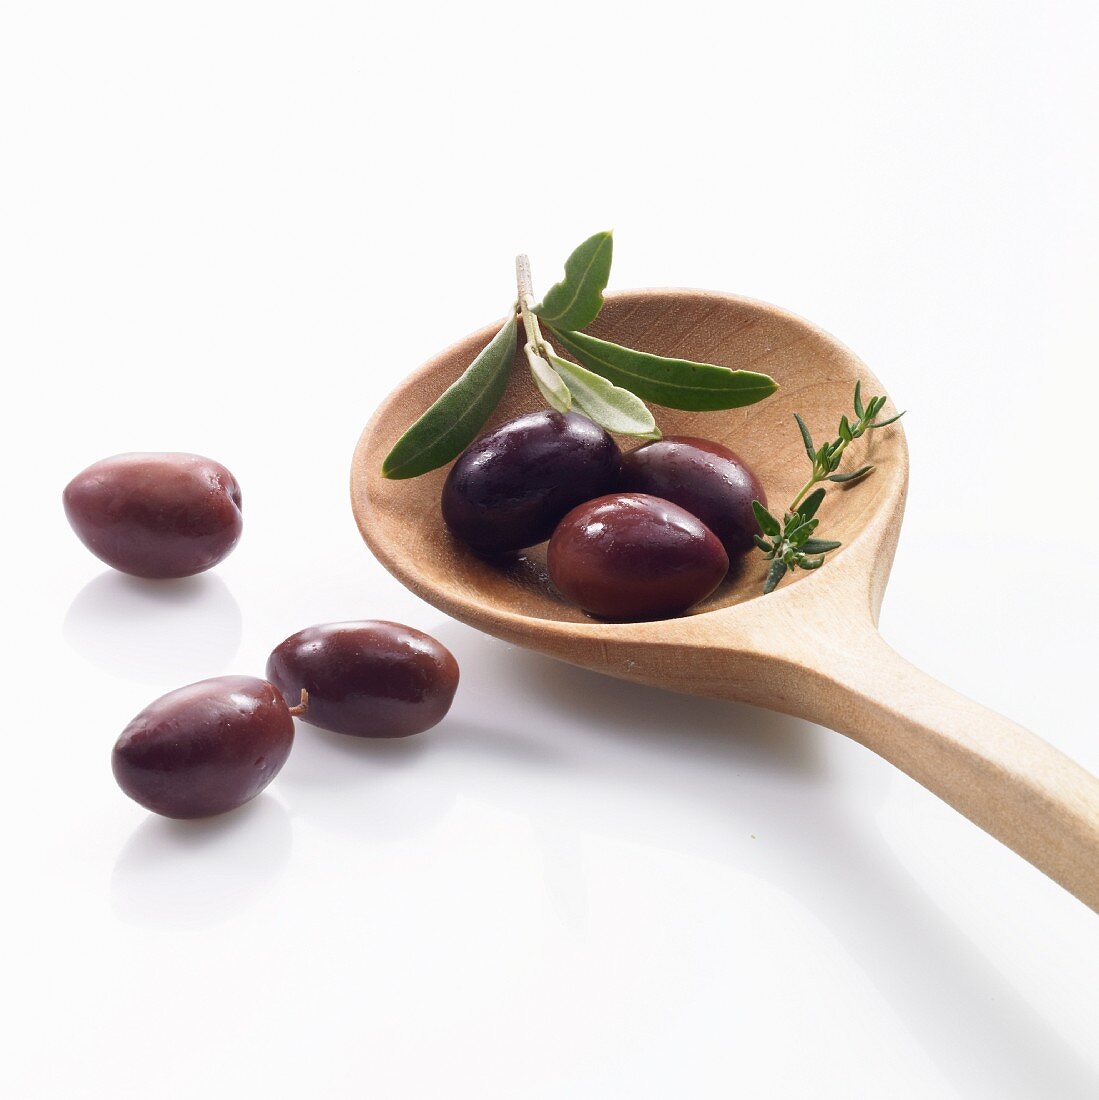 Black olives on a wooden spoon